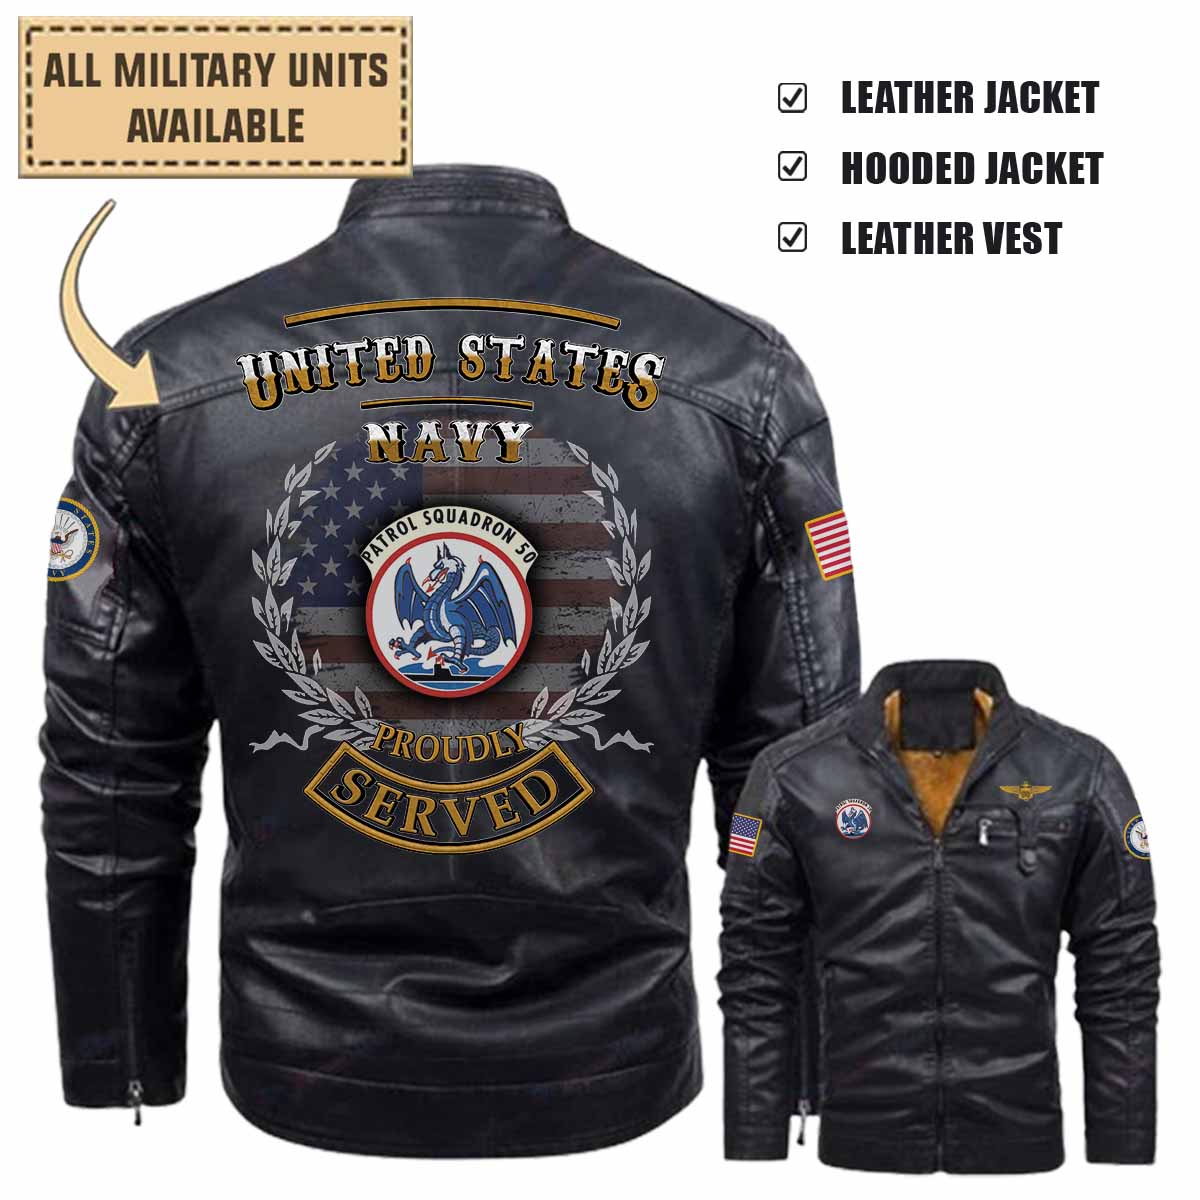 VP-50 Blue Dragons_Military Leather Jacket and Vest